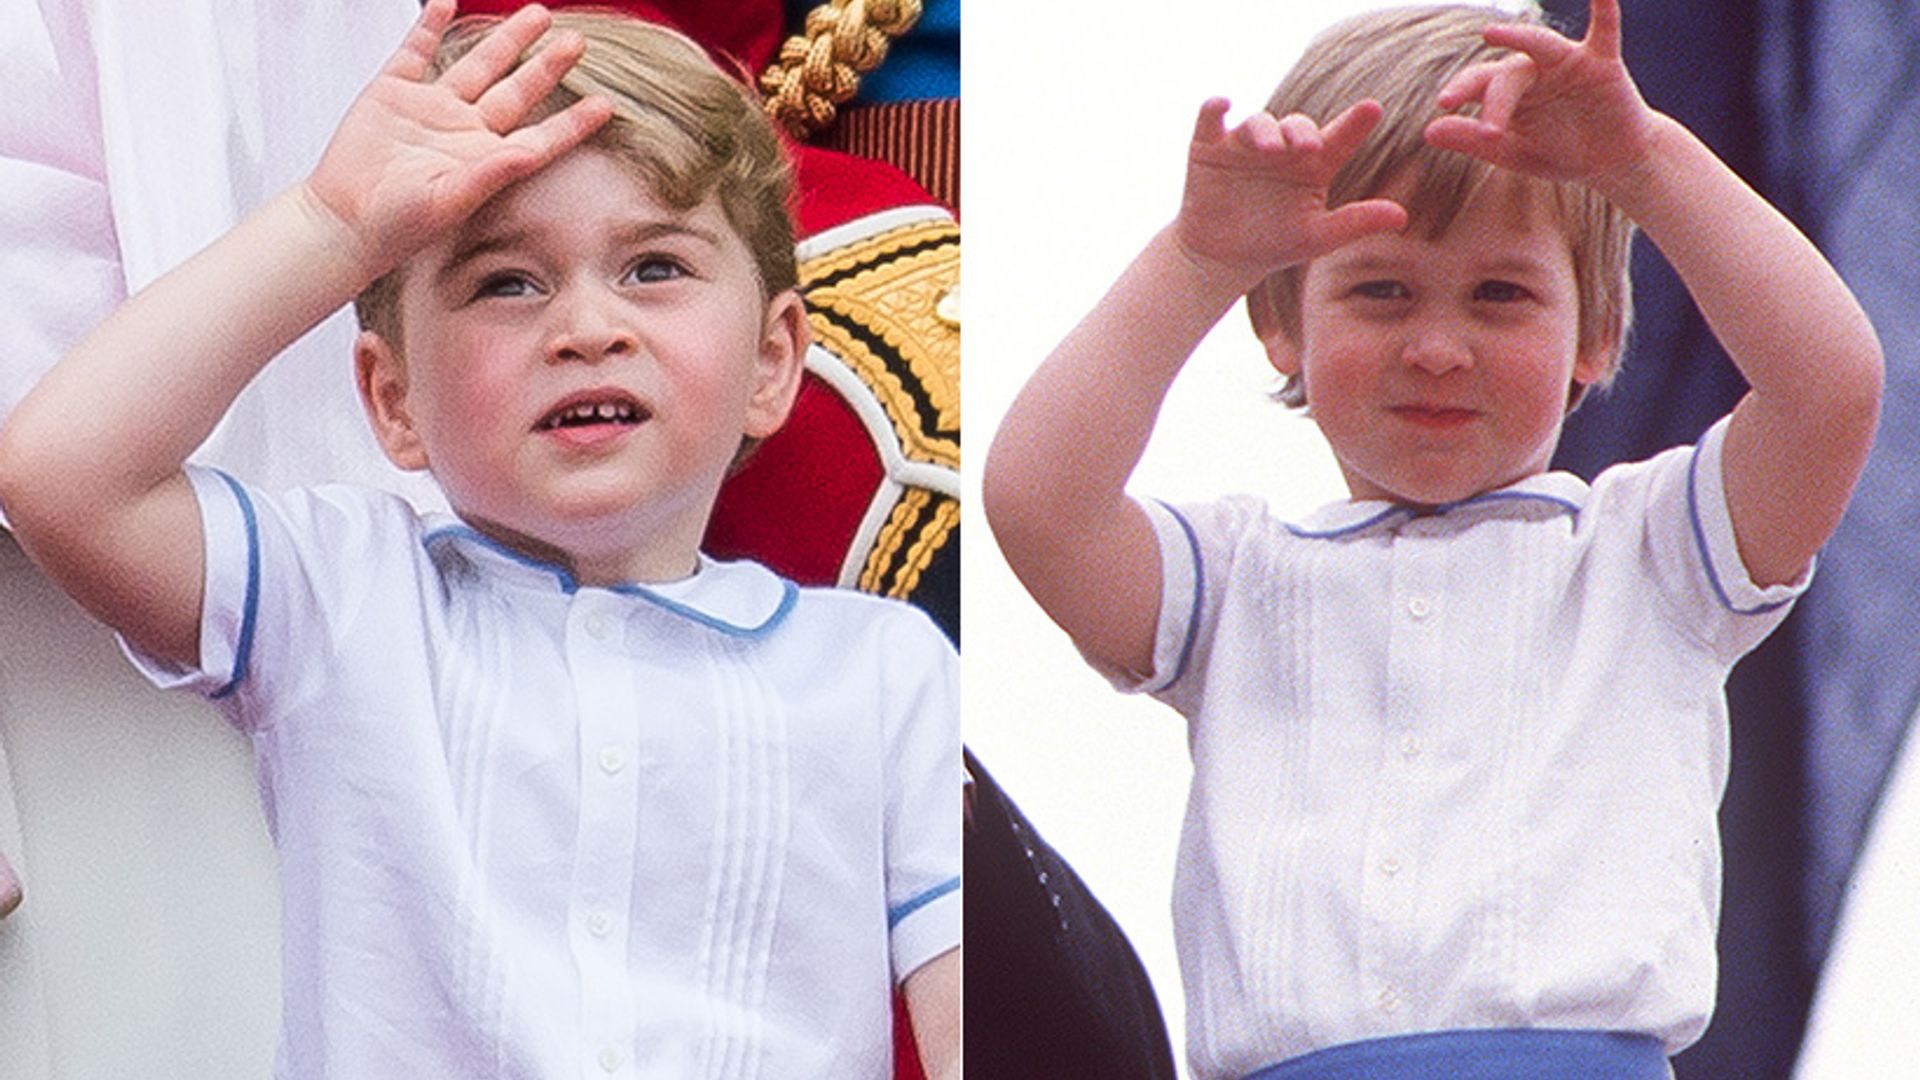 Gallery: All the times Prince George dressed like his dad Prince William